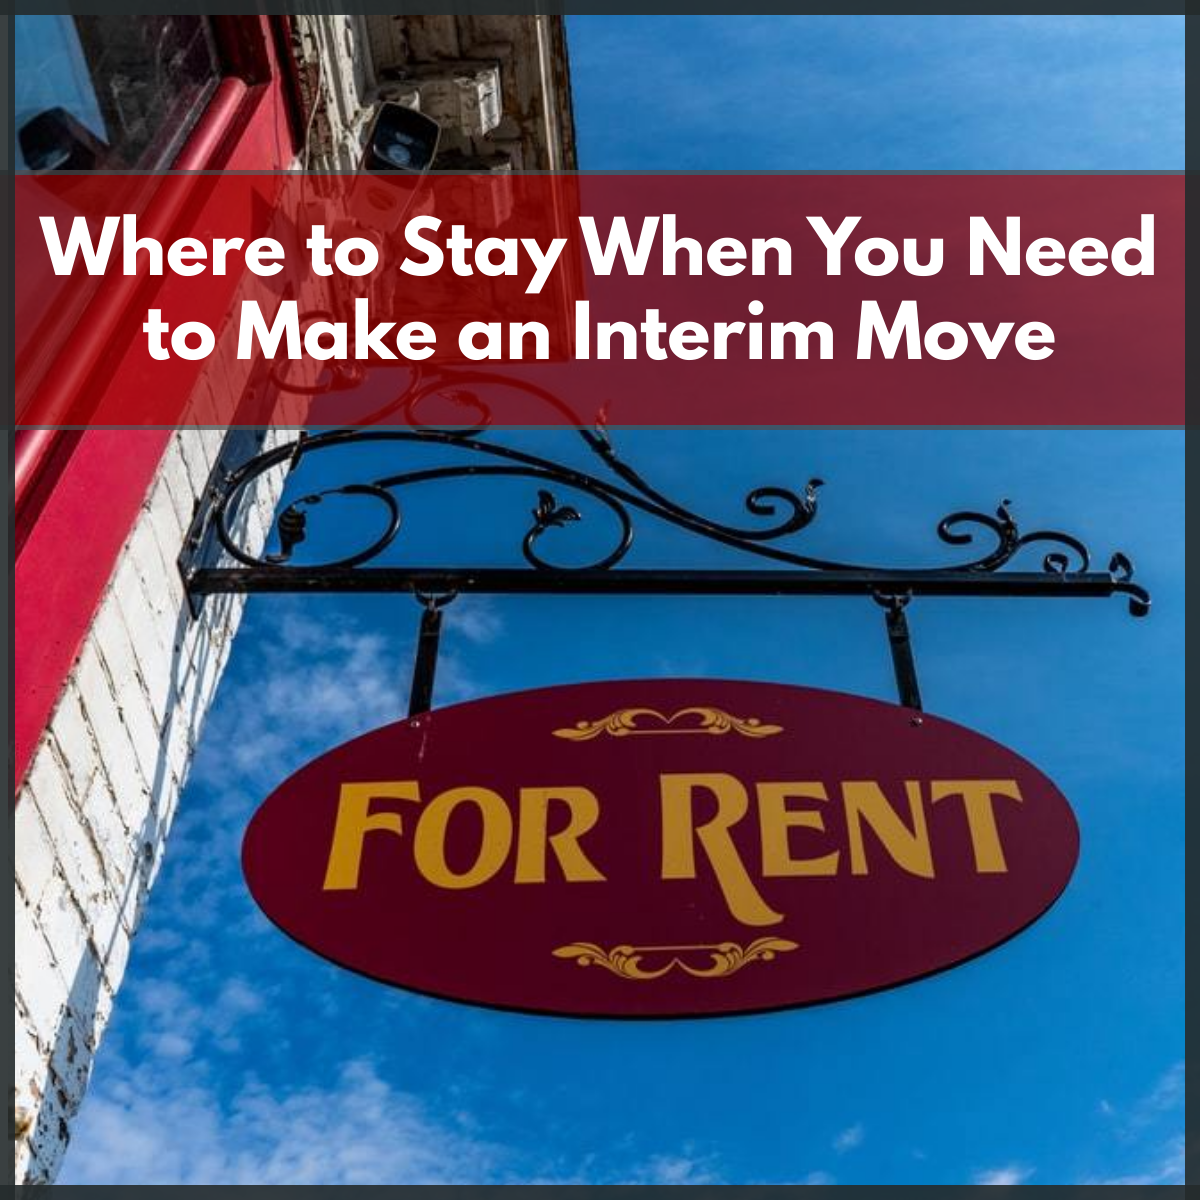 Where to Stay When You Need to Make an Interim Move - Where to Stay When You Need to Make an Interim Move